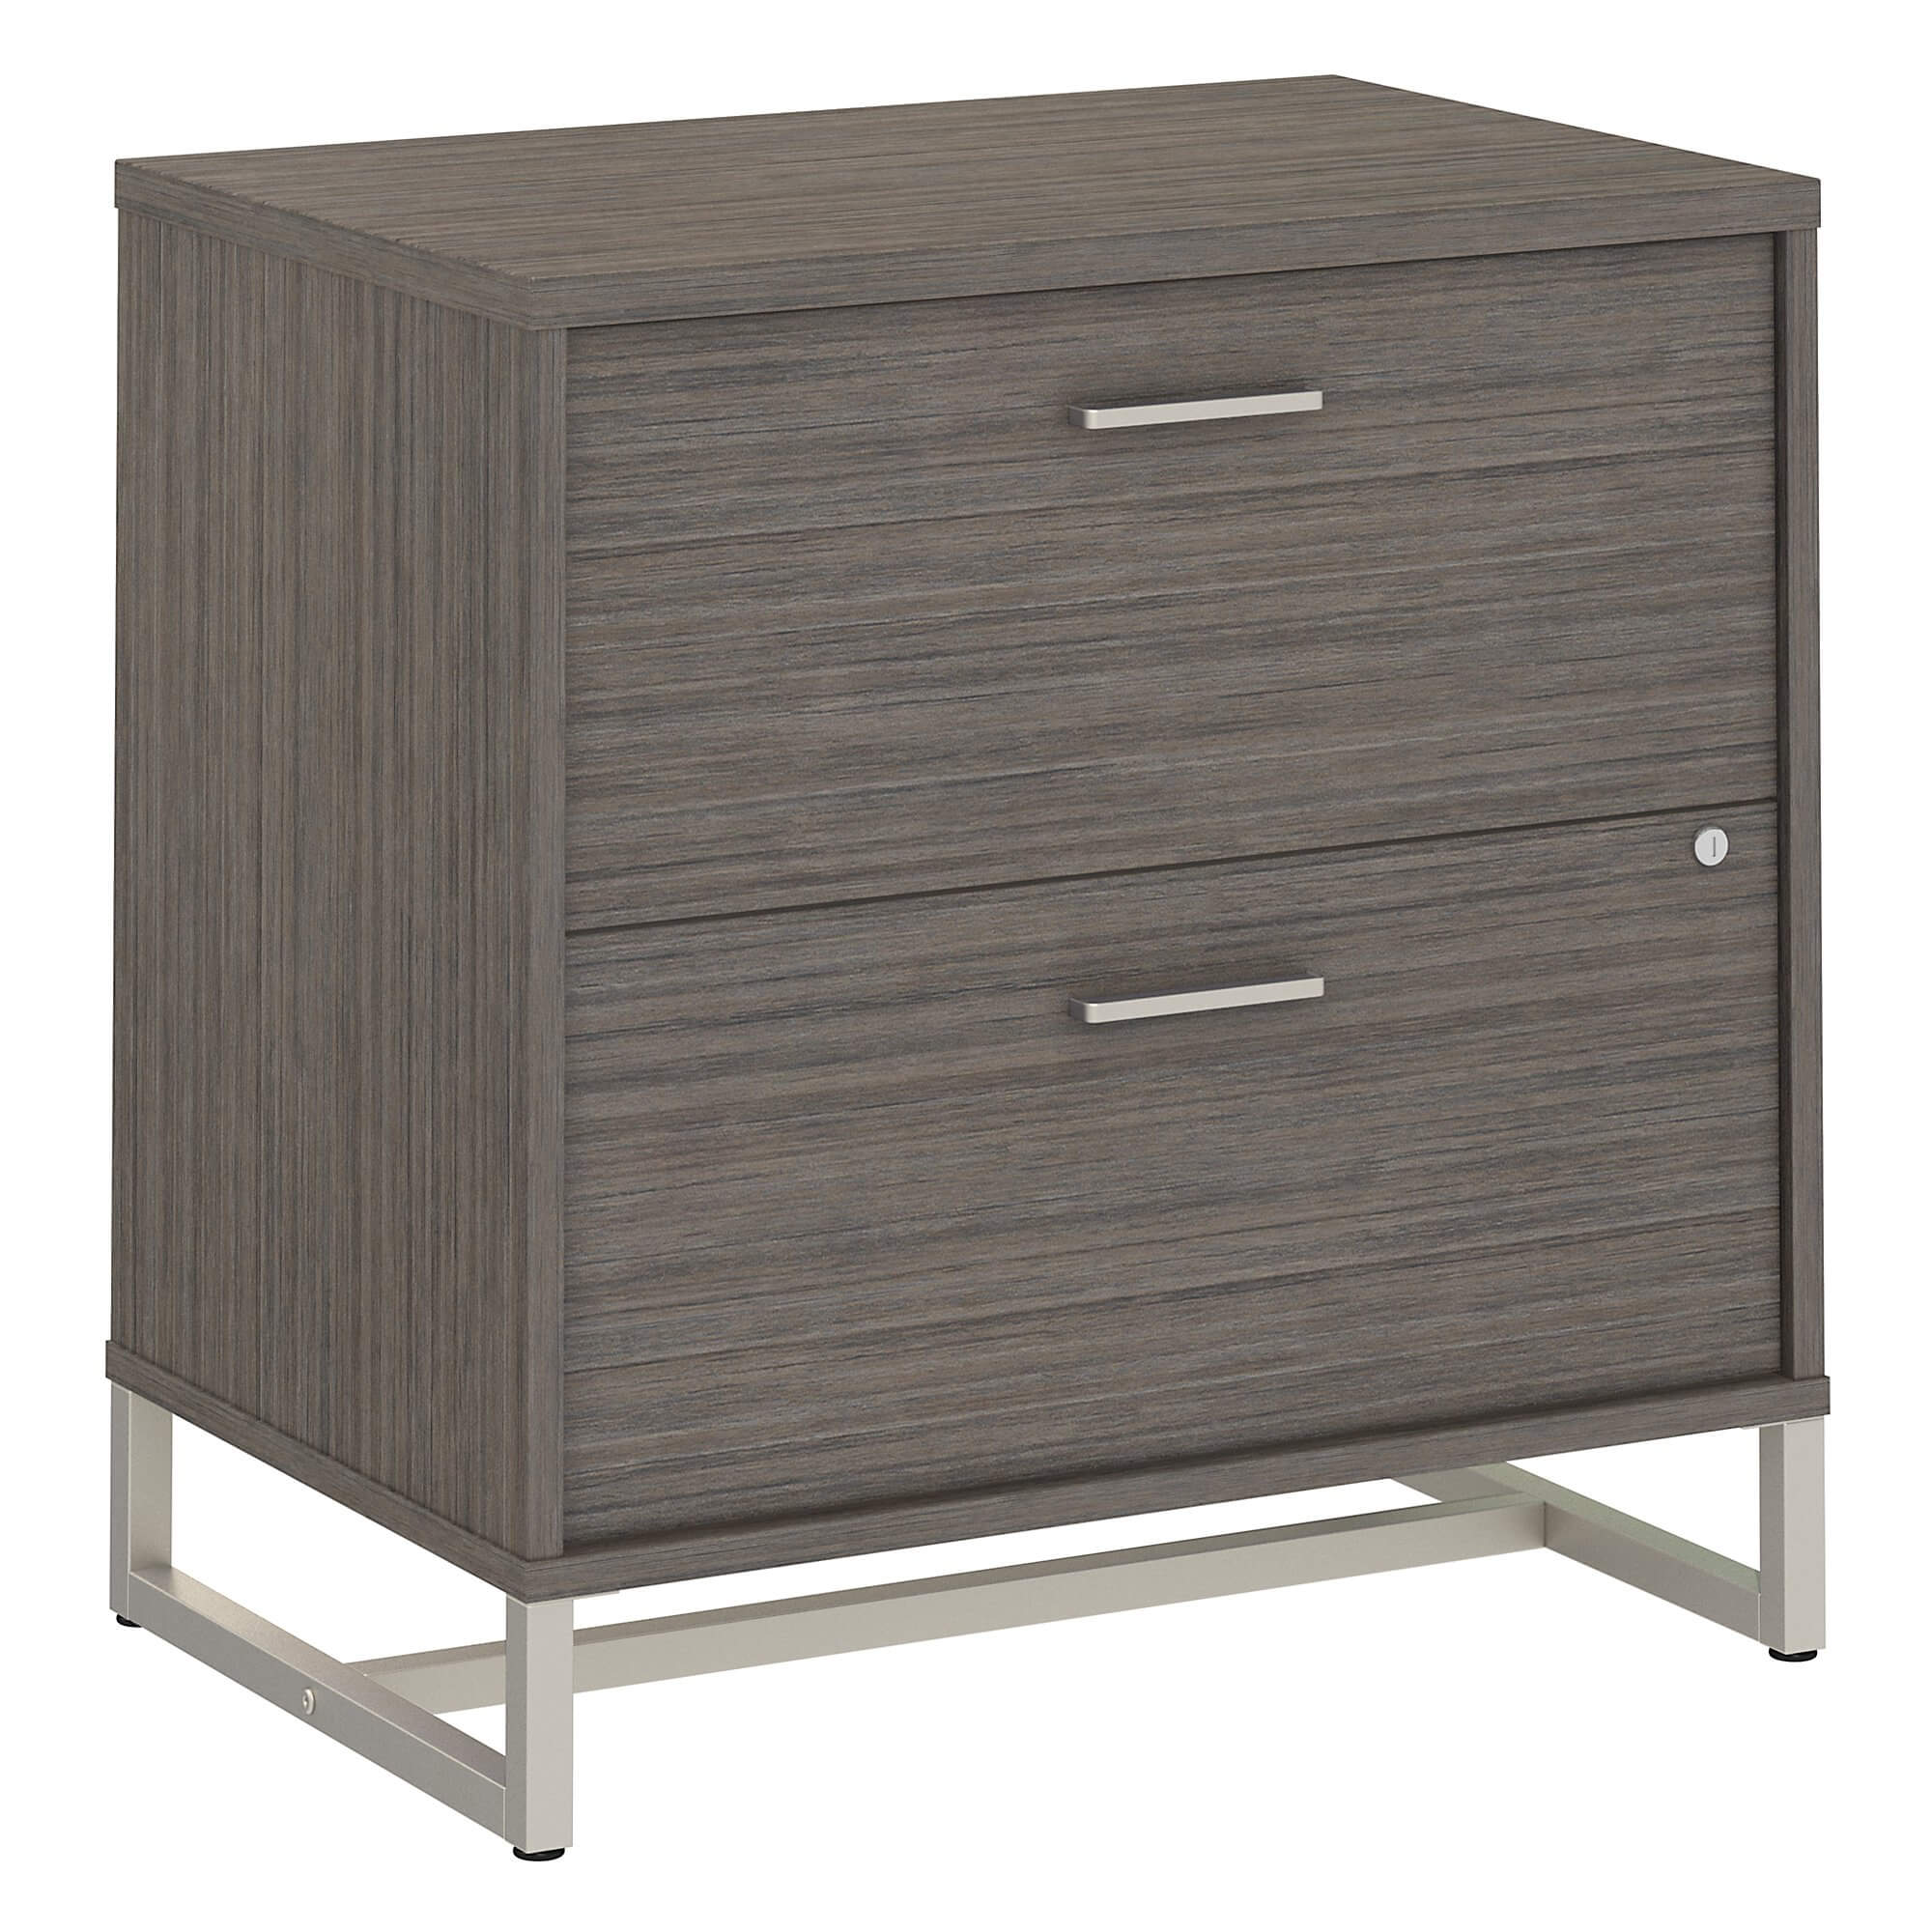 2 Drawer Filing Cabinet - Classify Lateral File Cabinet 2 ...